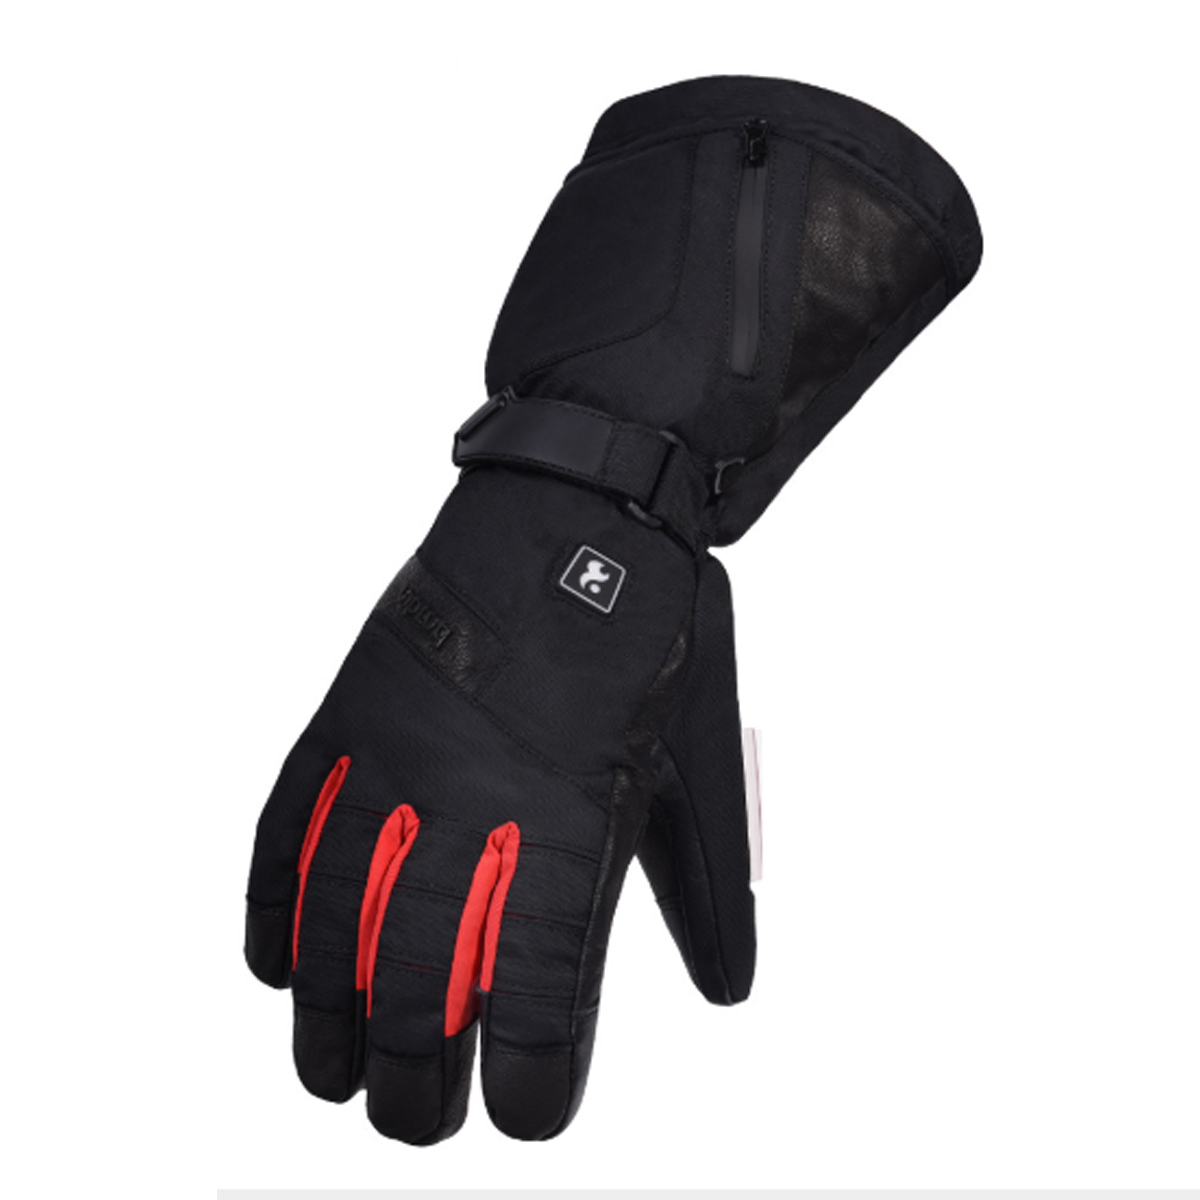 3000mAh Rechargeable Battery Electric Heated Gloves Waterproof Winter Warmer Temperature Control Skiing Warm